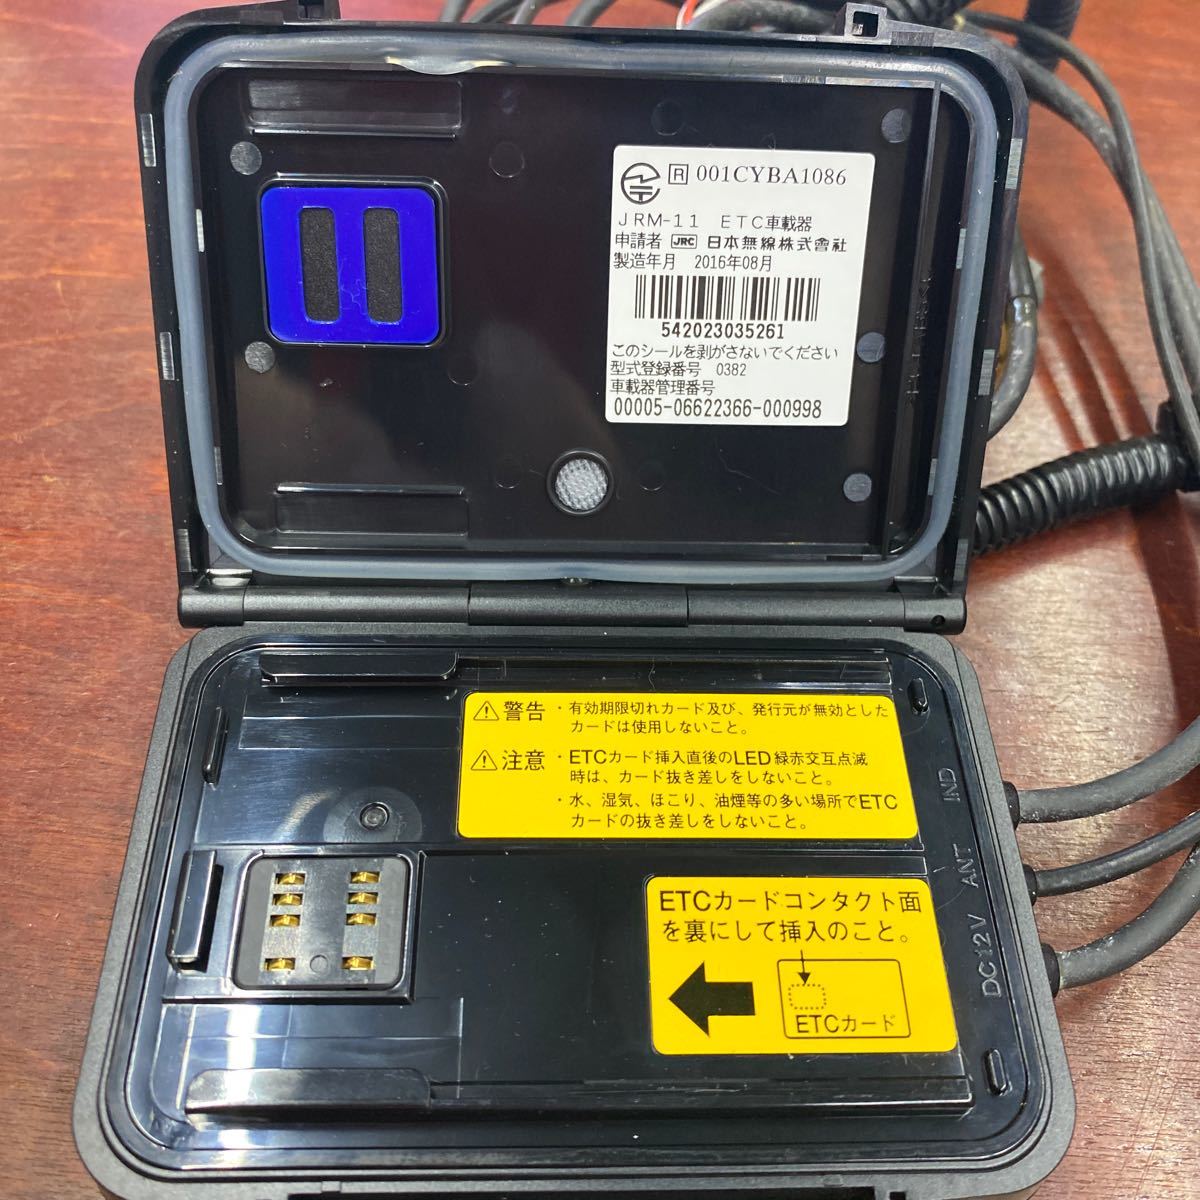  for motorcycle ETC(0998) Japan wireless on-board device JRM-11 operation verification ending manufacture 2016 year 08 month 